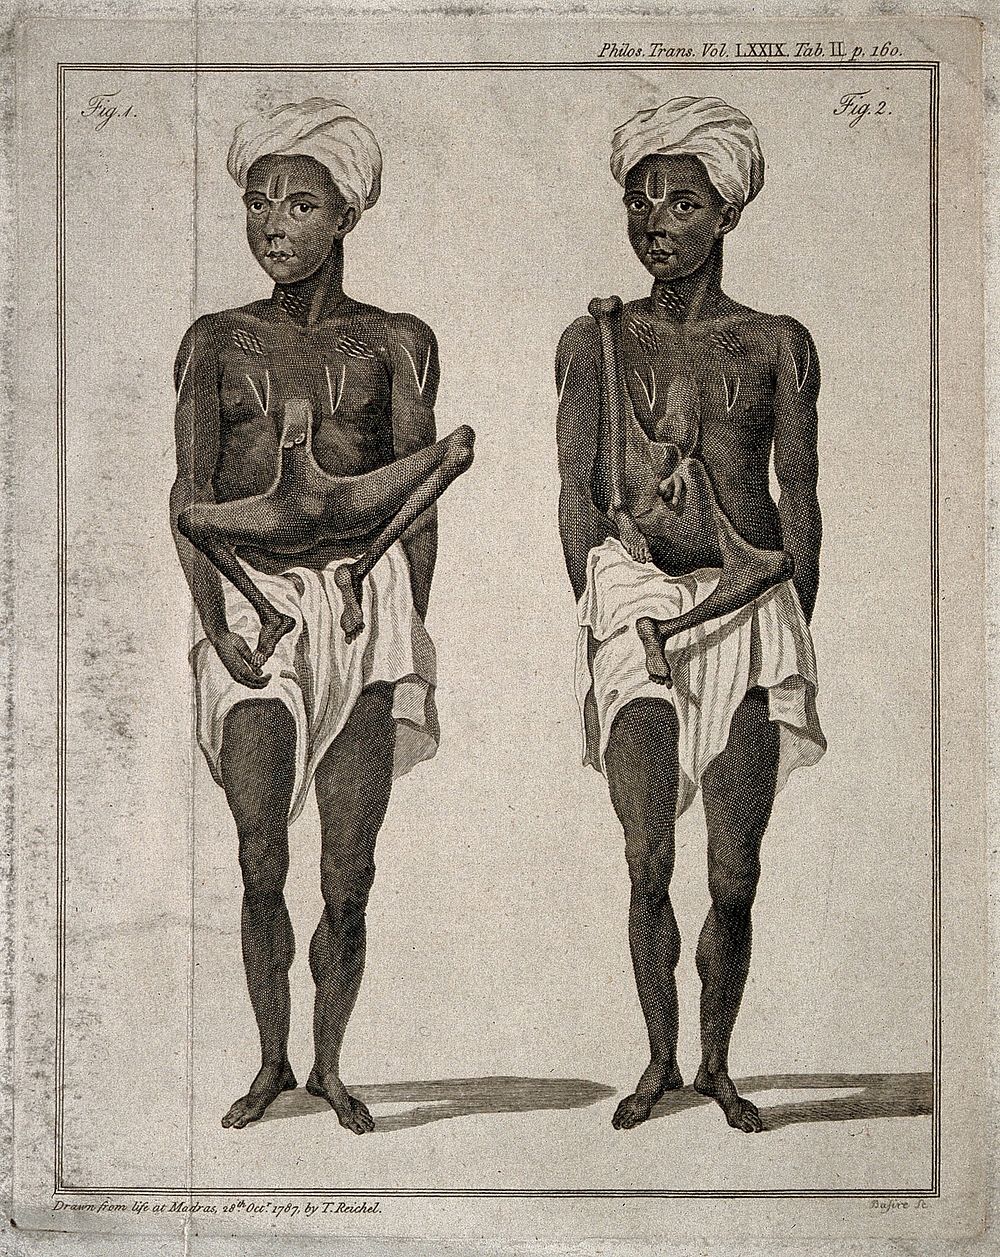 An Indian man with a headless body attached to his trunk. Engraving by J. Basire after T. Reichel, 1787.